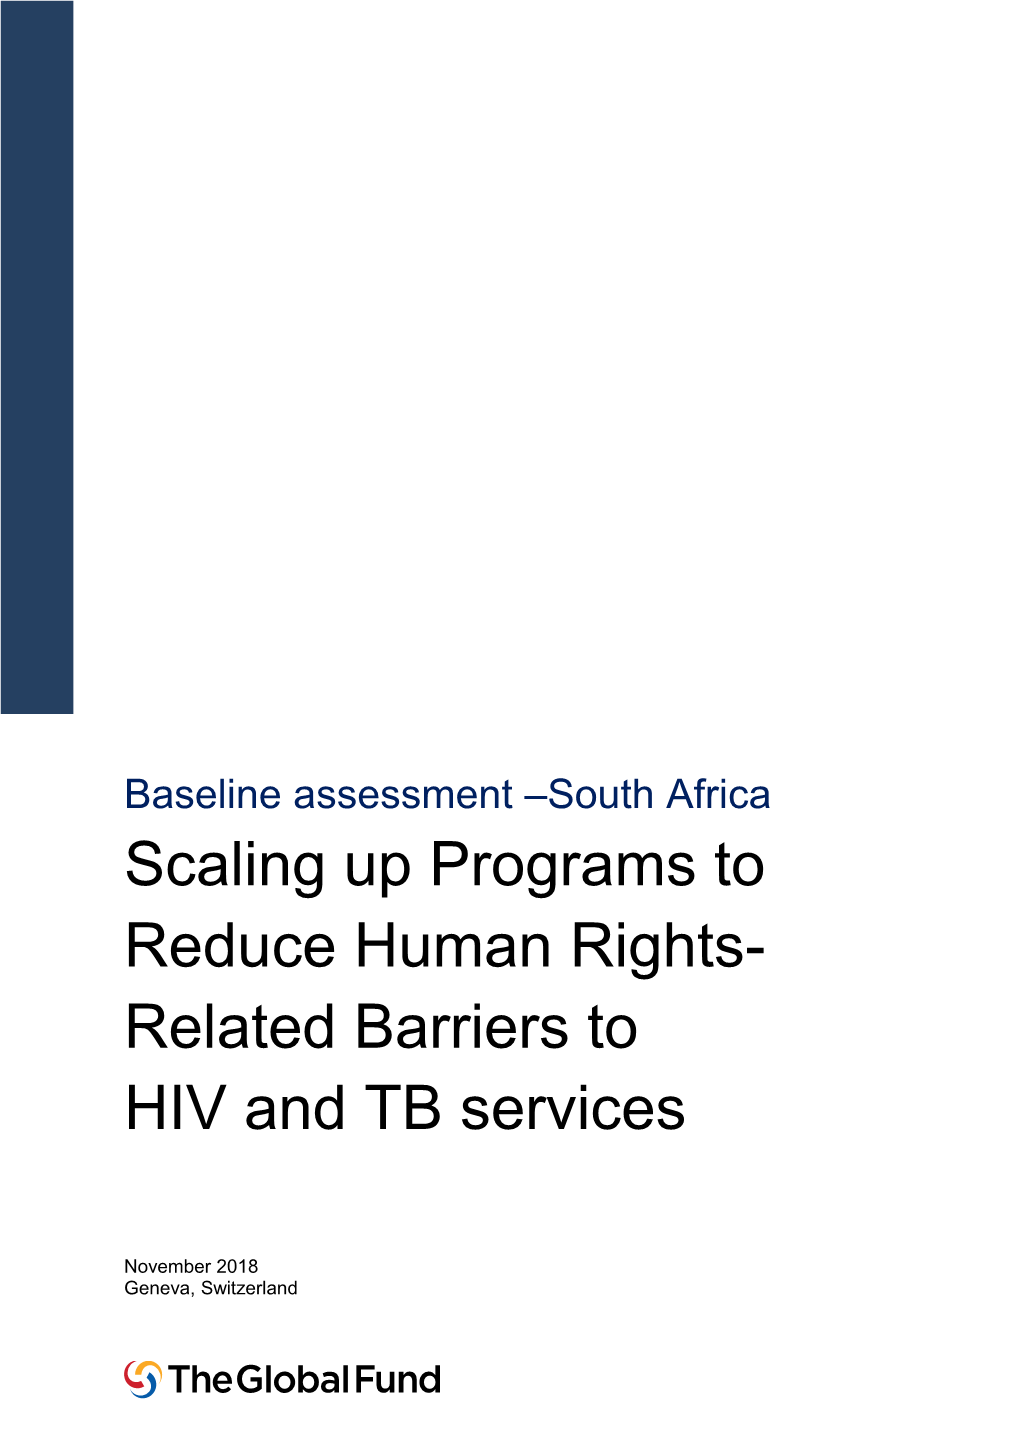 South Africa Scaling up Programs to Reduce Human Rights- Related Barriers to HIV and TB Services